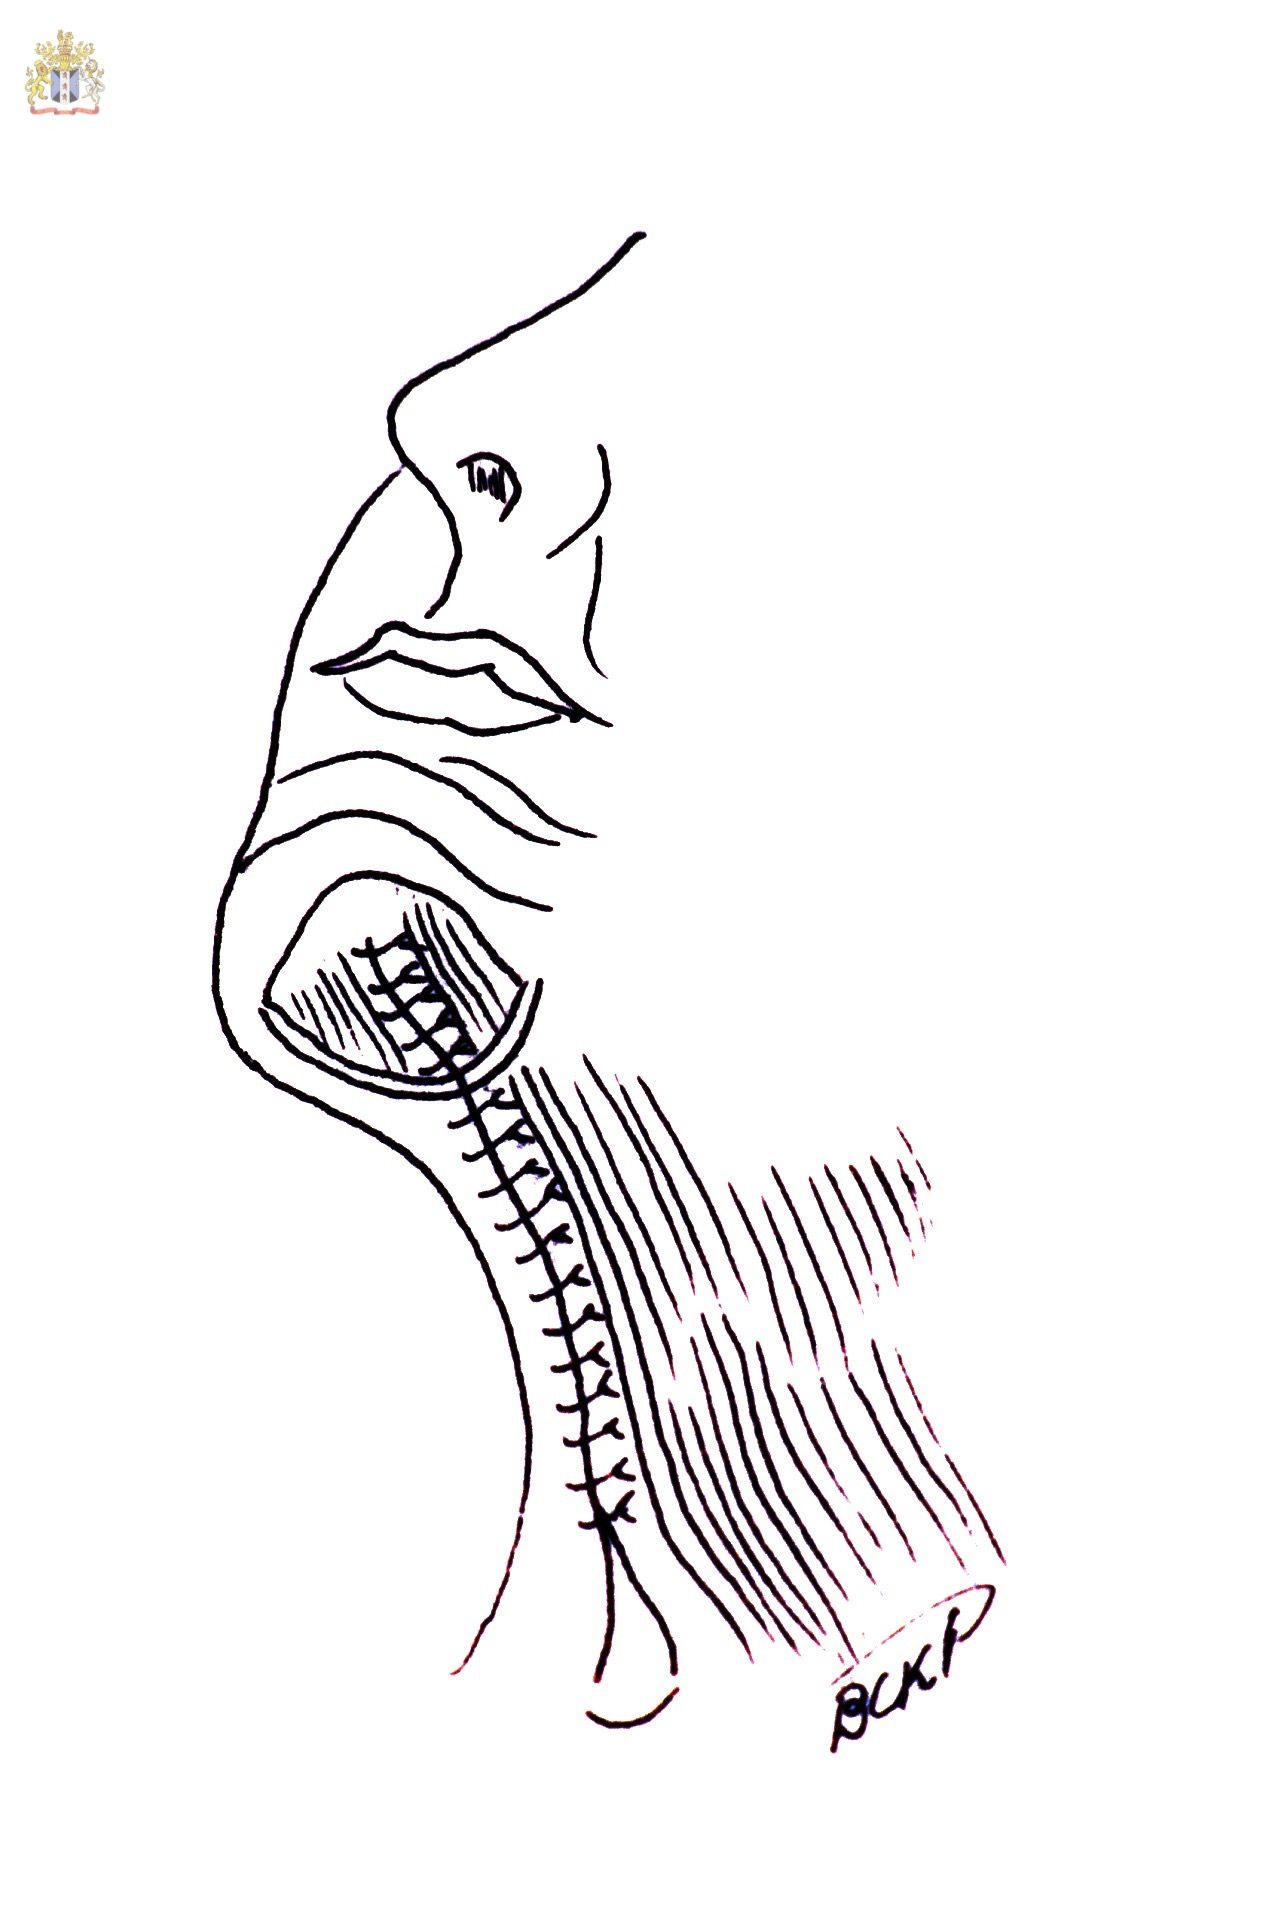 The Corset Platysmaplasty where the medial separated platysmal bands are sutured with two or three layers of sutures from the mentum to the supraclavicular zone